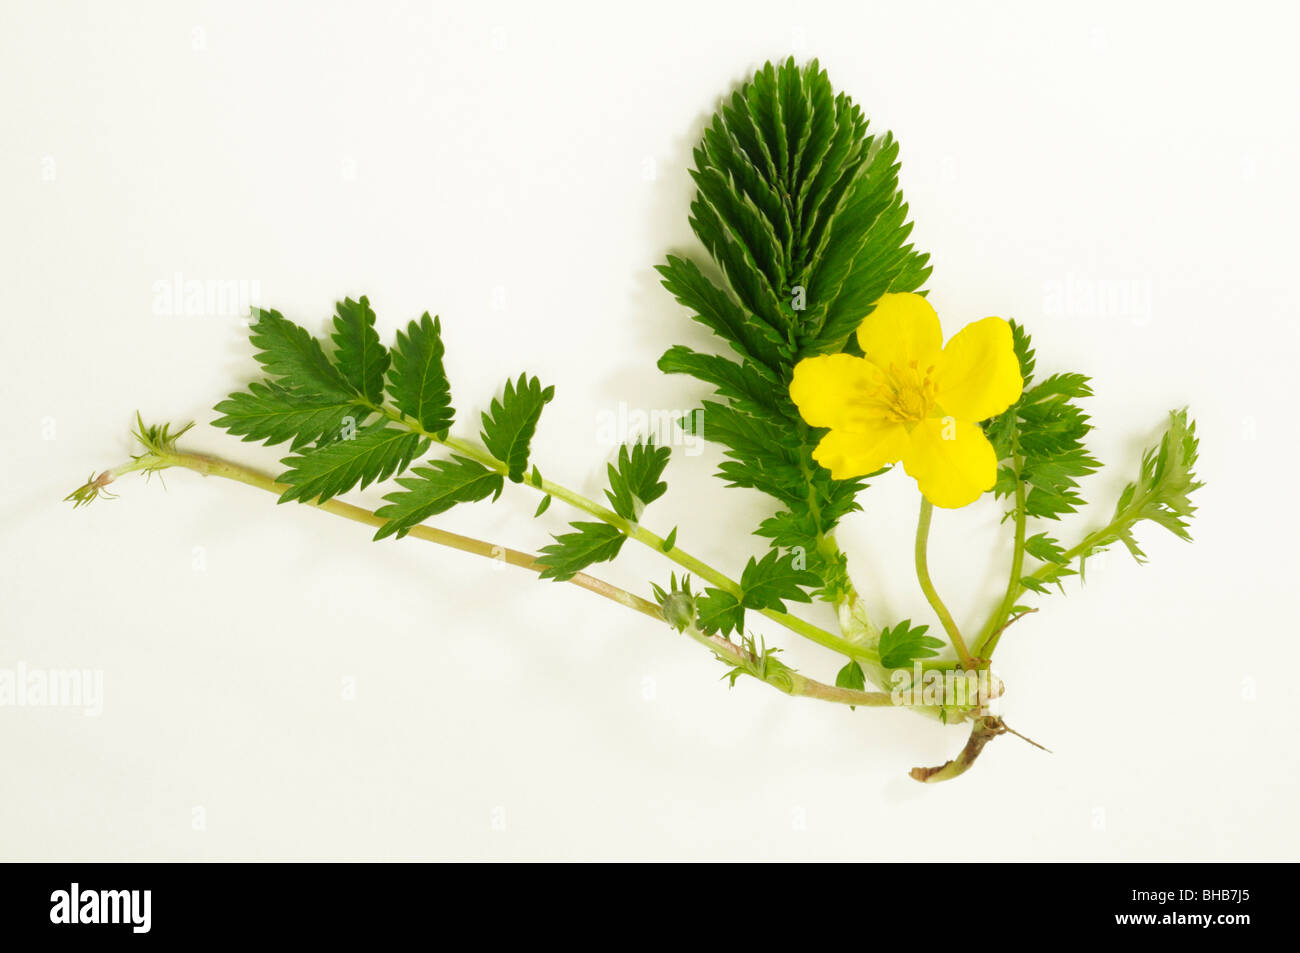 Goose Grass, Silverweed, Wild Tansy (Potentilla anserina). Plant with flower, leaves and root, studio picture. Stock Photo